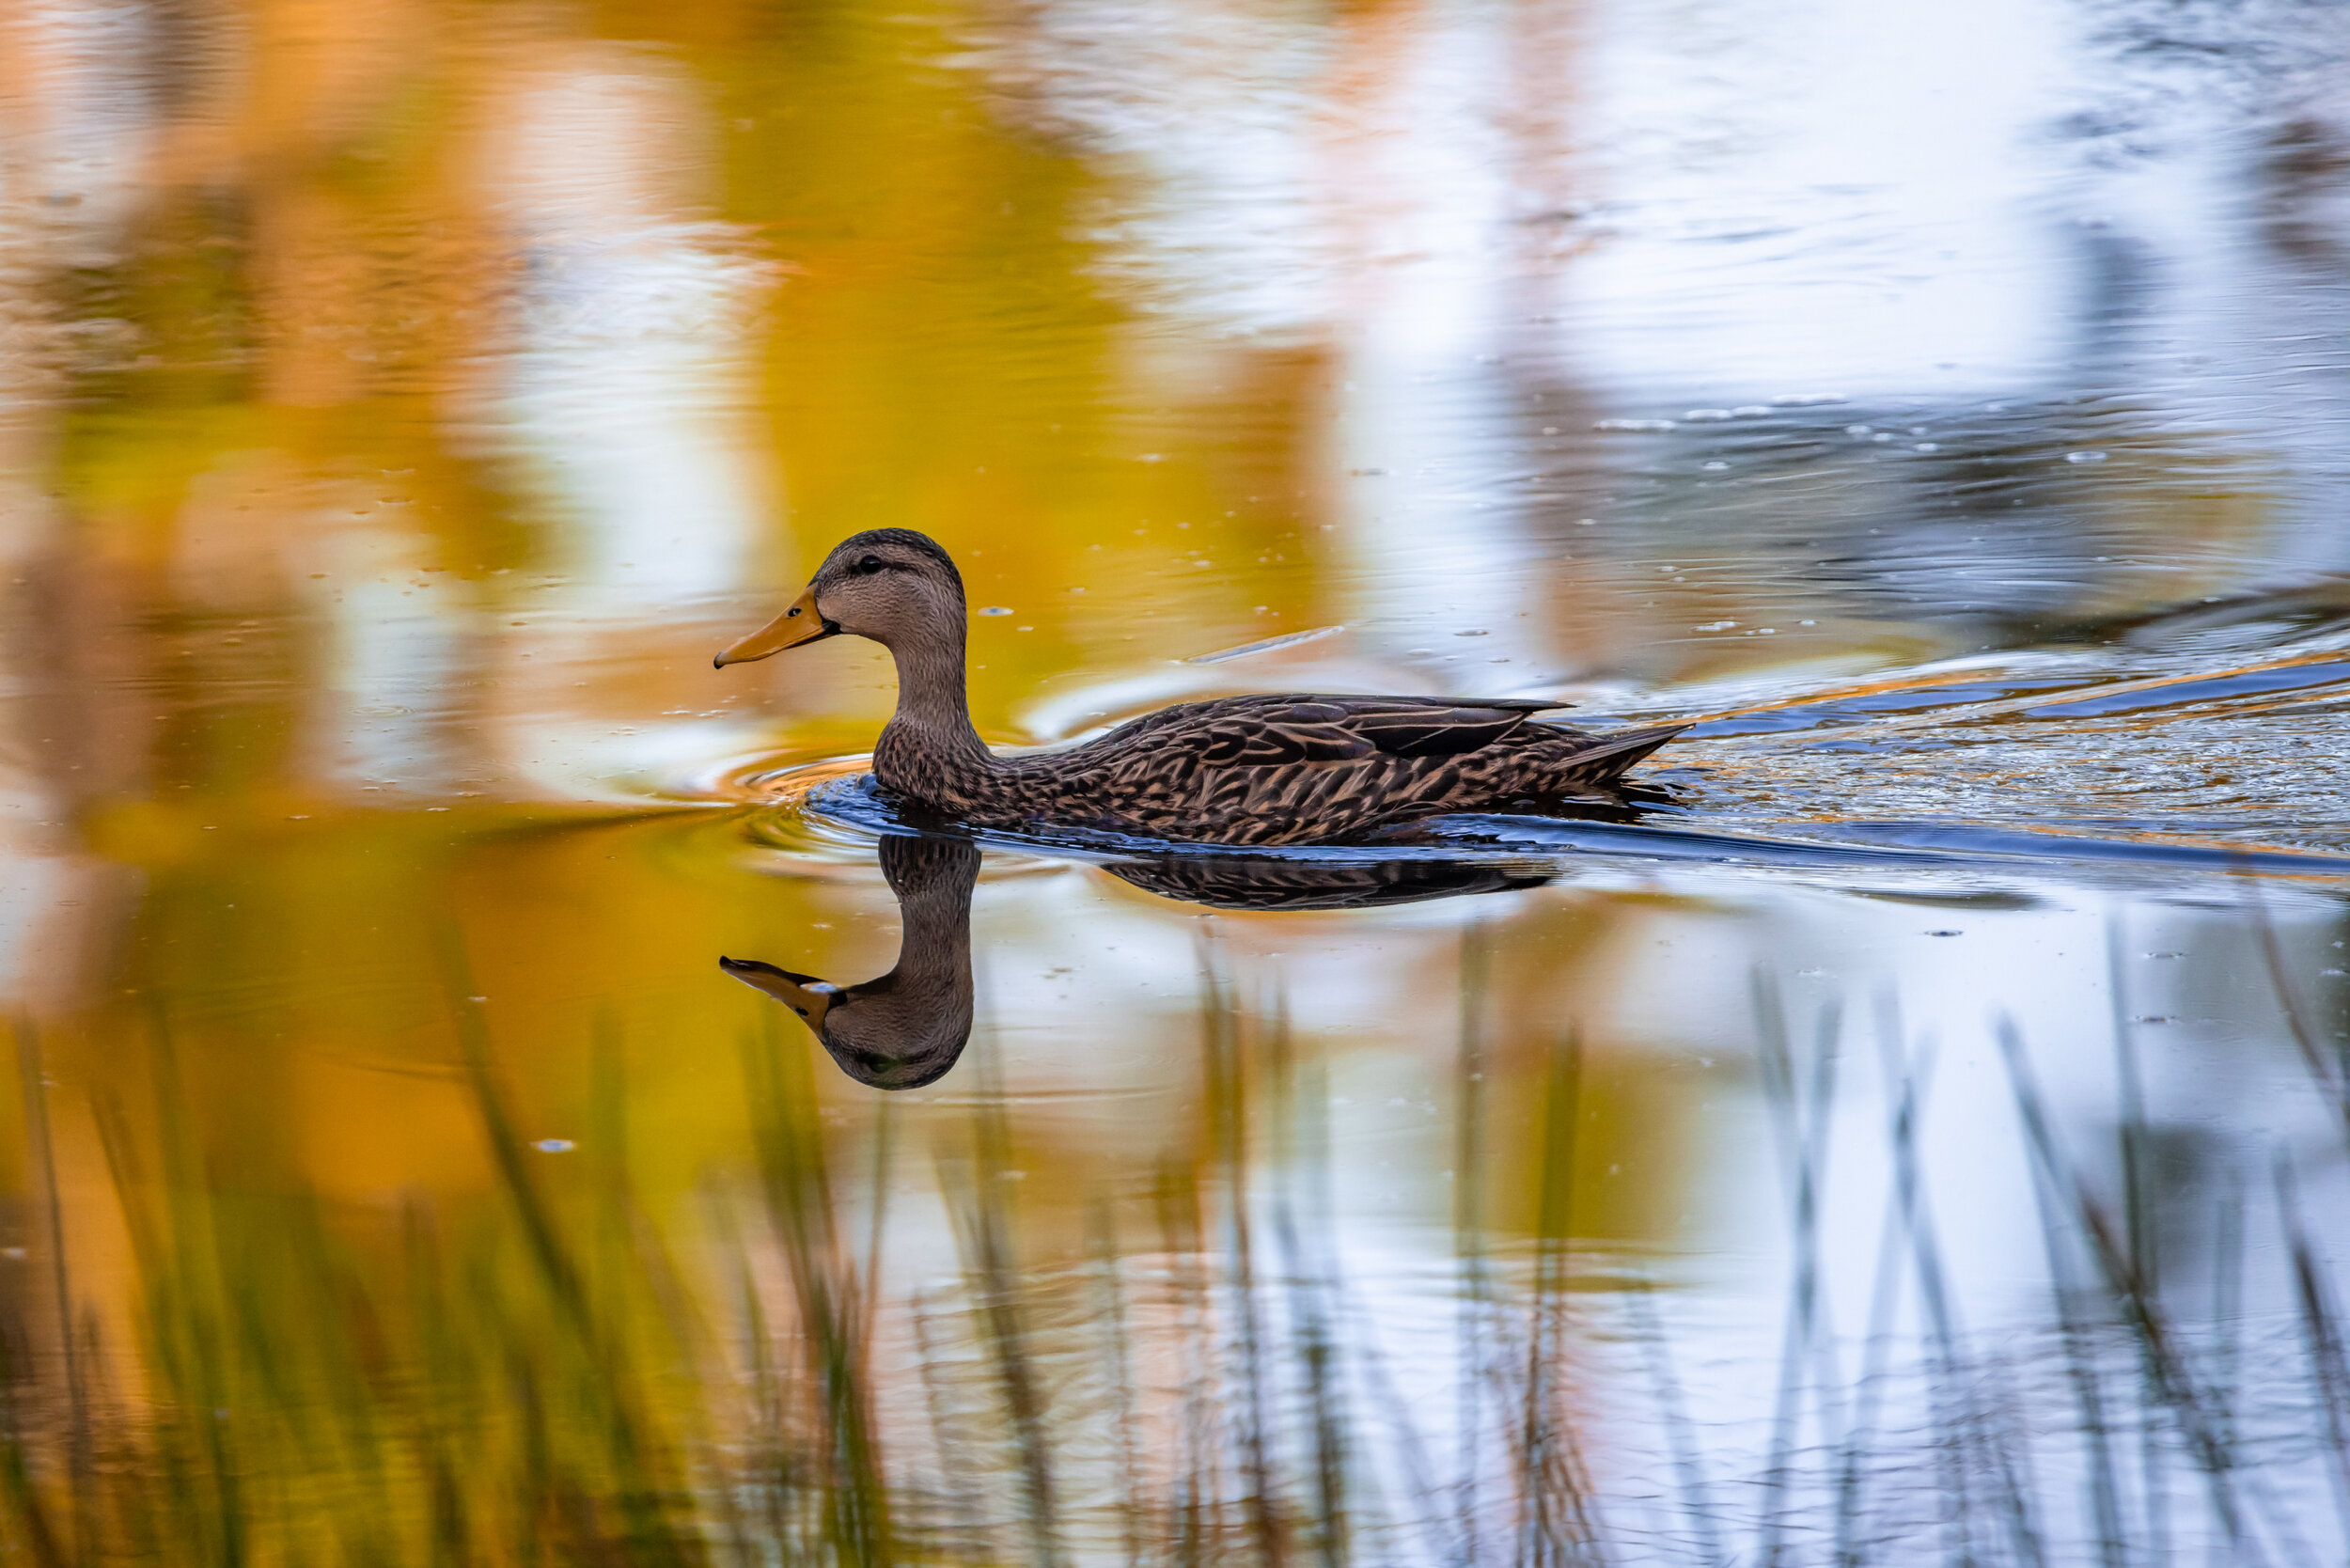 The Calm Serenity of a Duck.